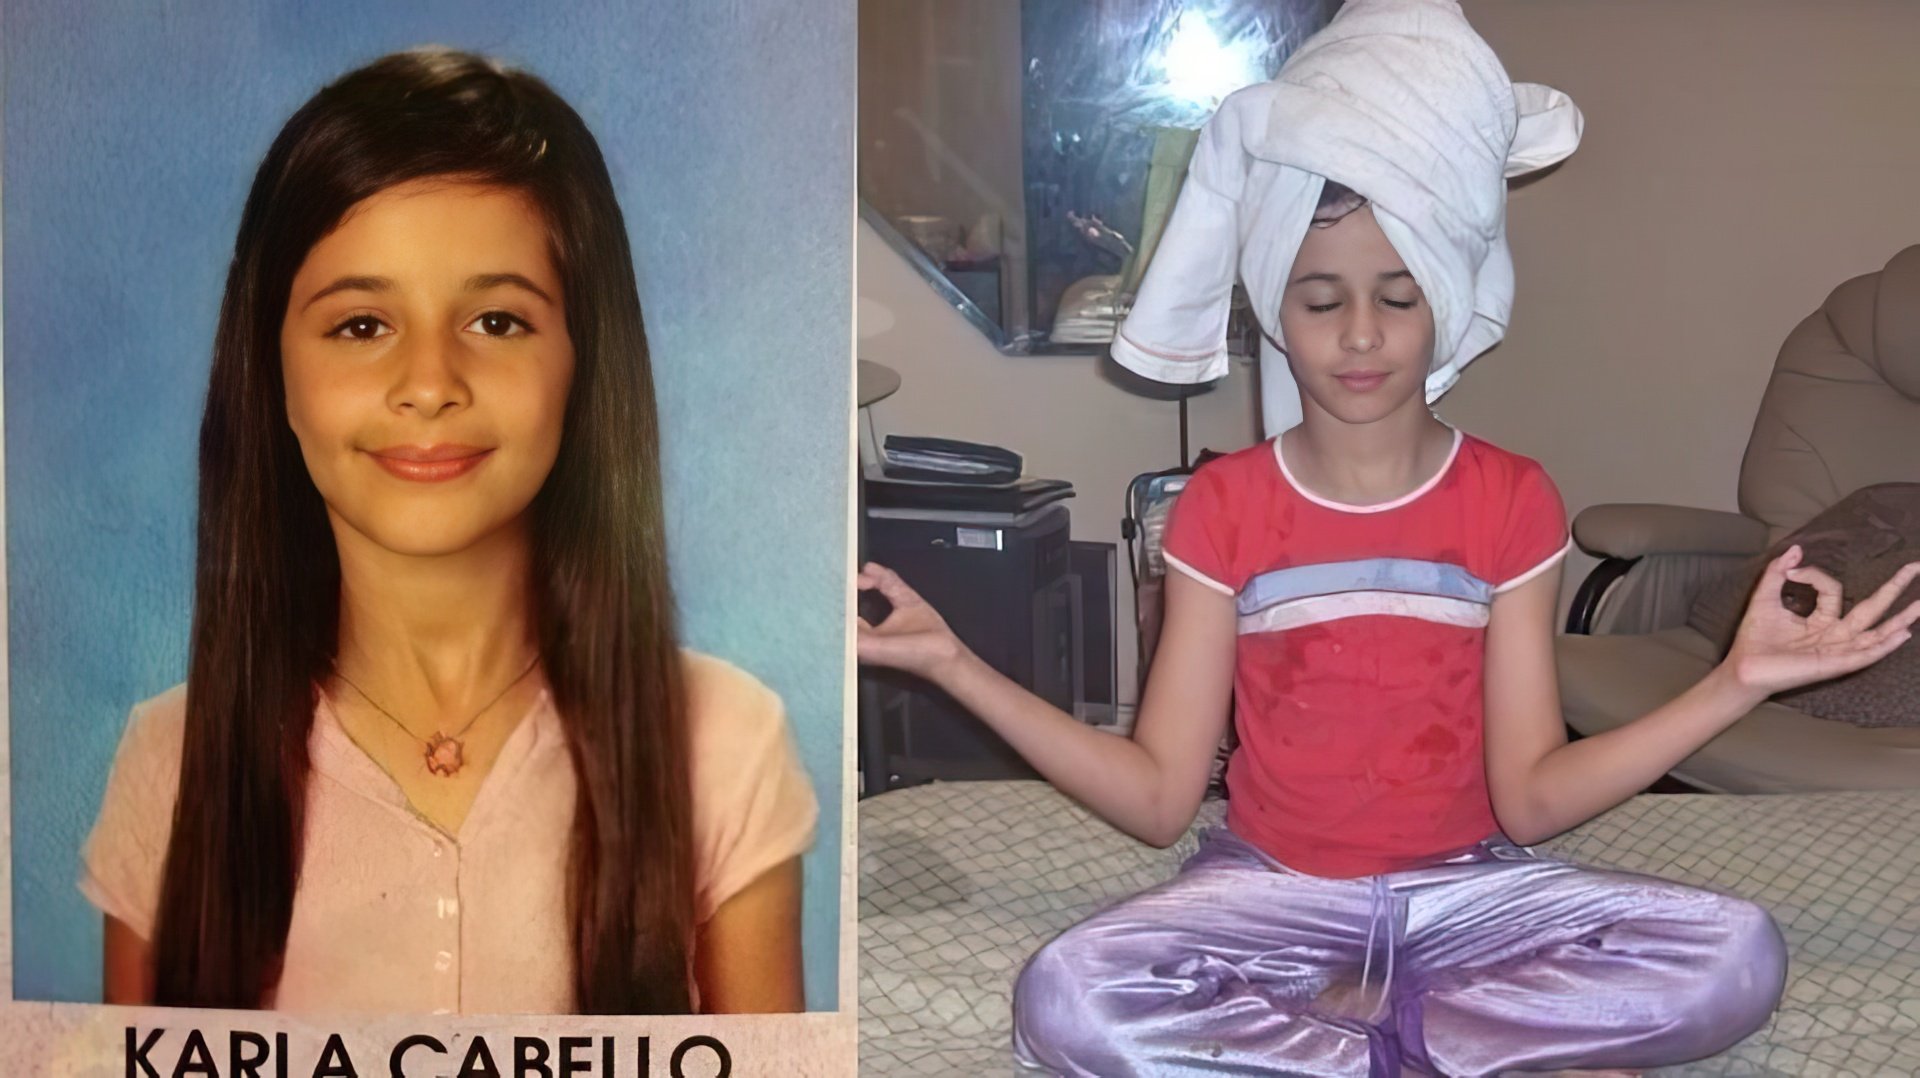 Camila Cabello in her youth